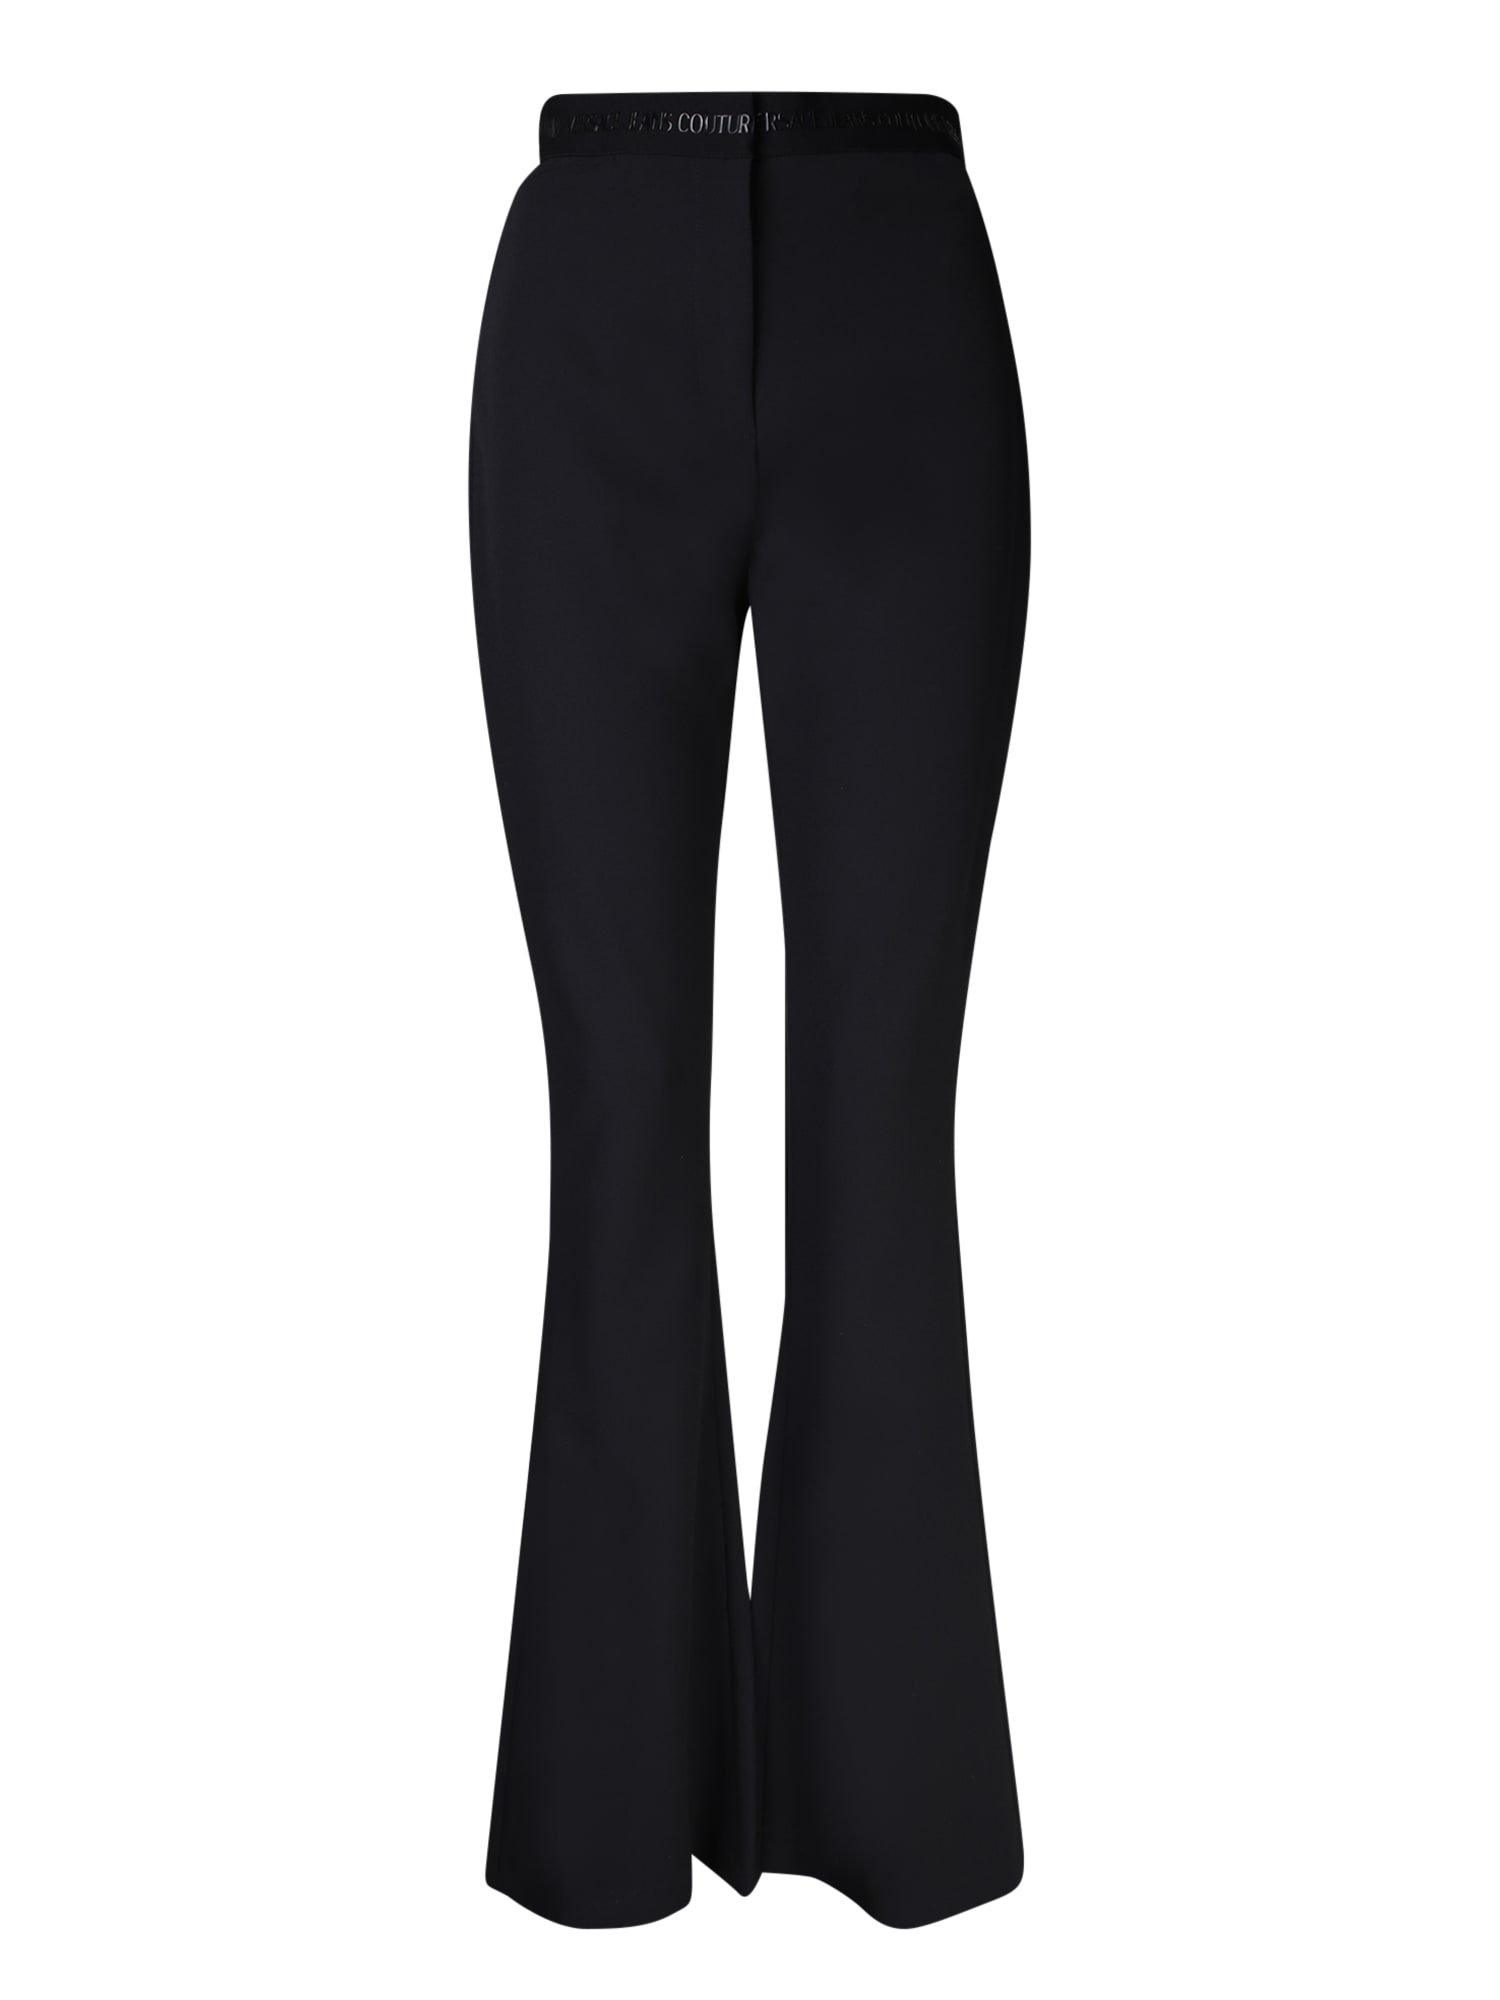 VERSACE JEANS COUTURE FLARED BLACK TROUSERS BY VERSACE JEANS COUTURE